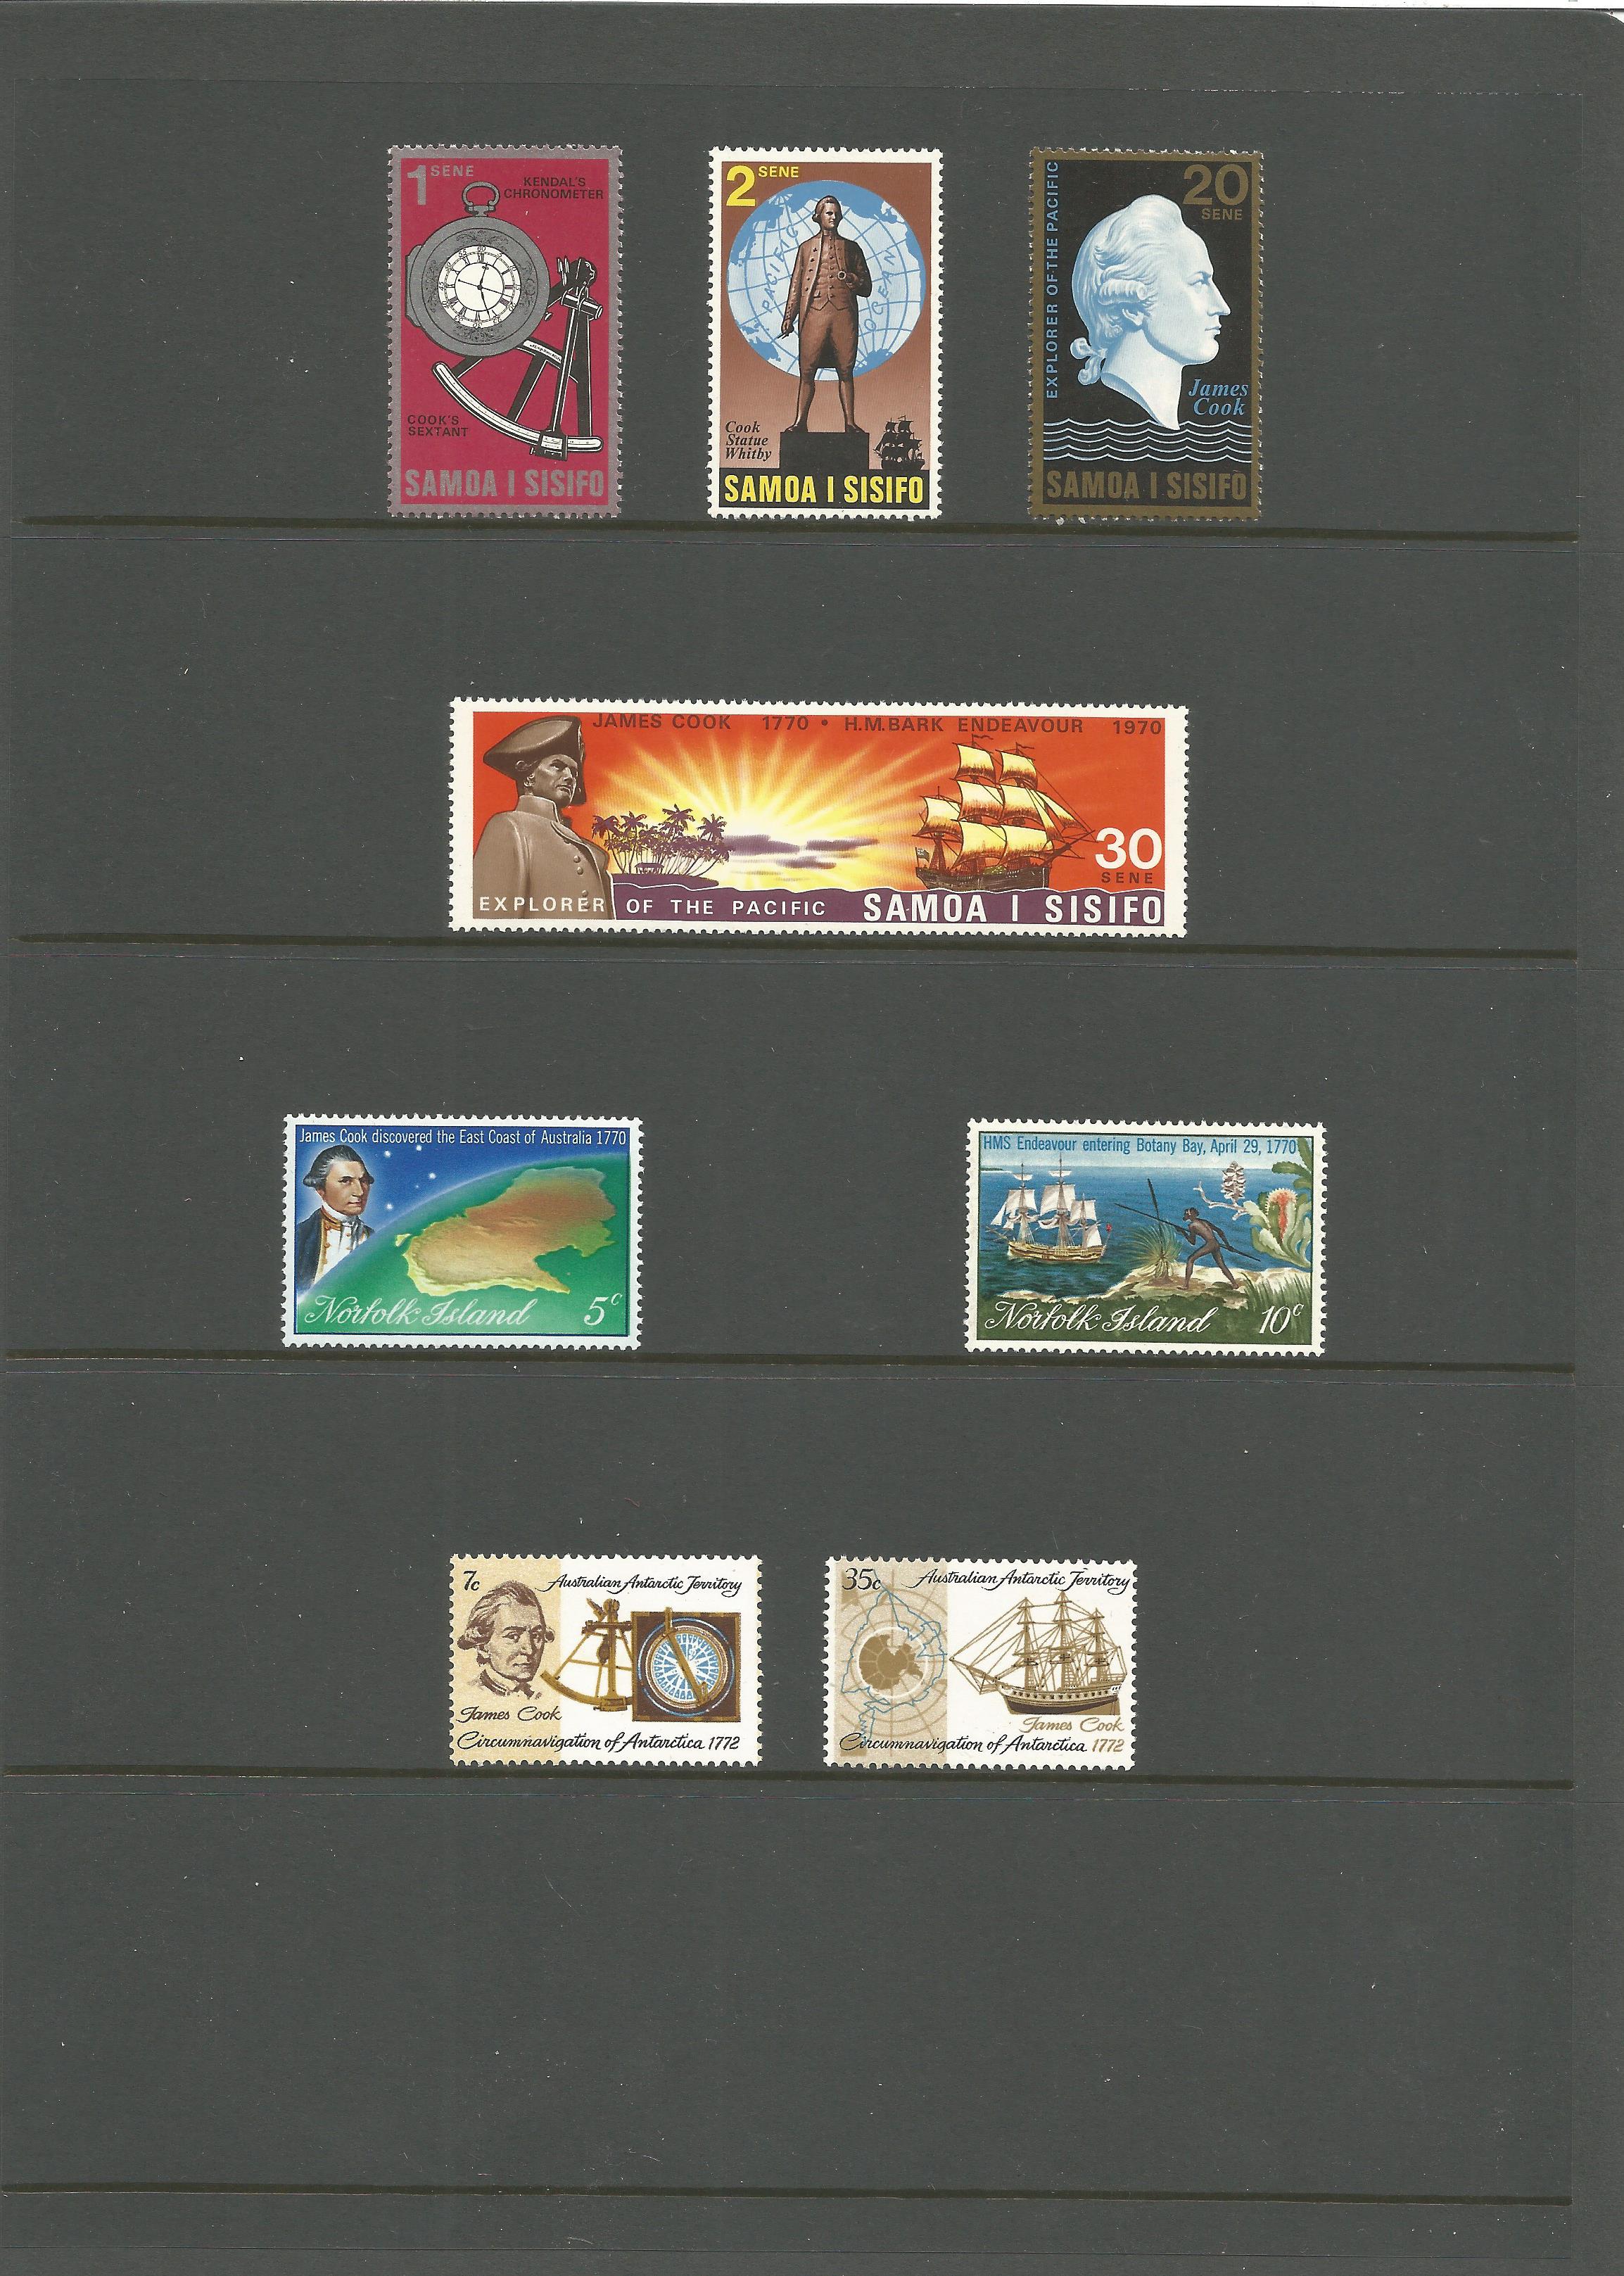 Gilbert Islands, Norfolk Island, Samoa, Nine, Guernsey, approx. 30 stamps, mint condition. Good - Image 2 of 3